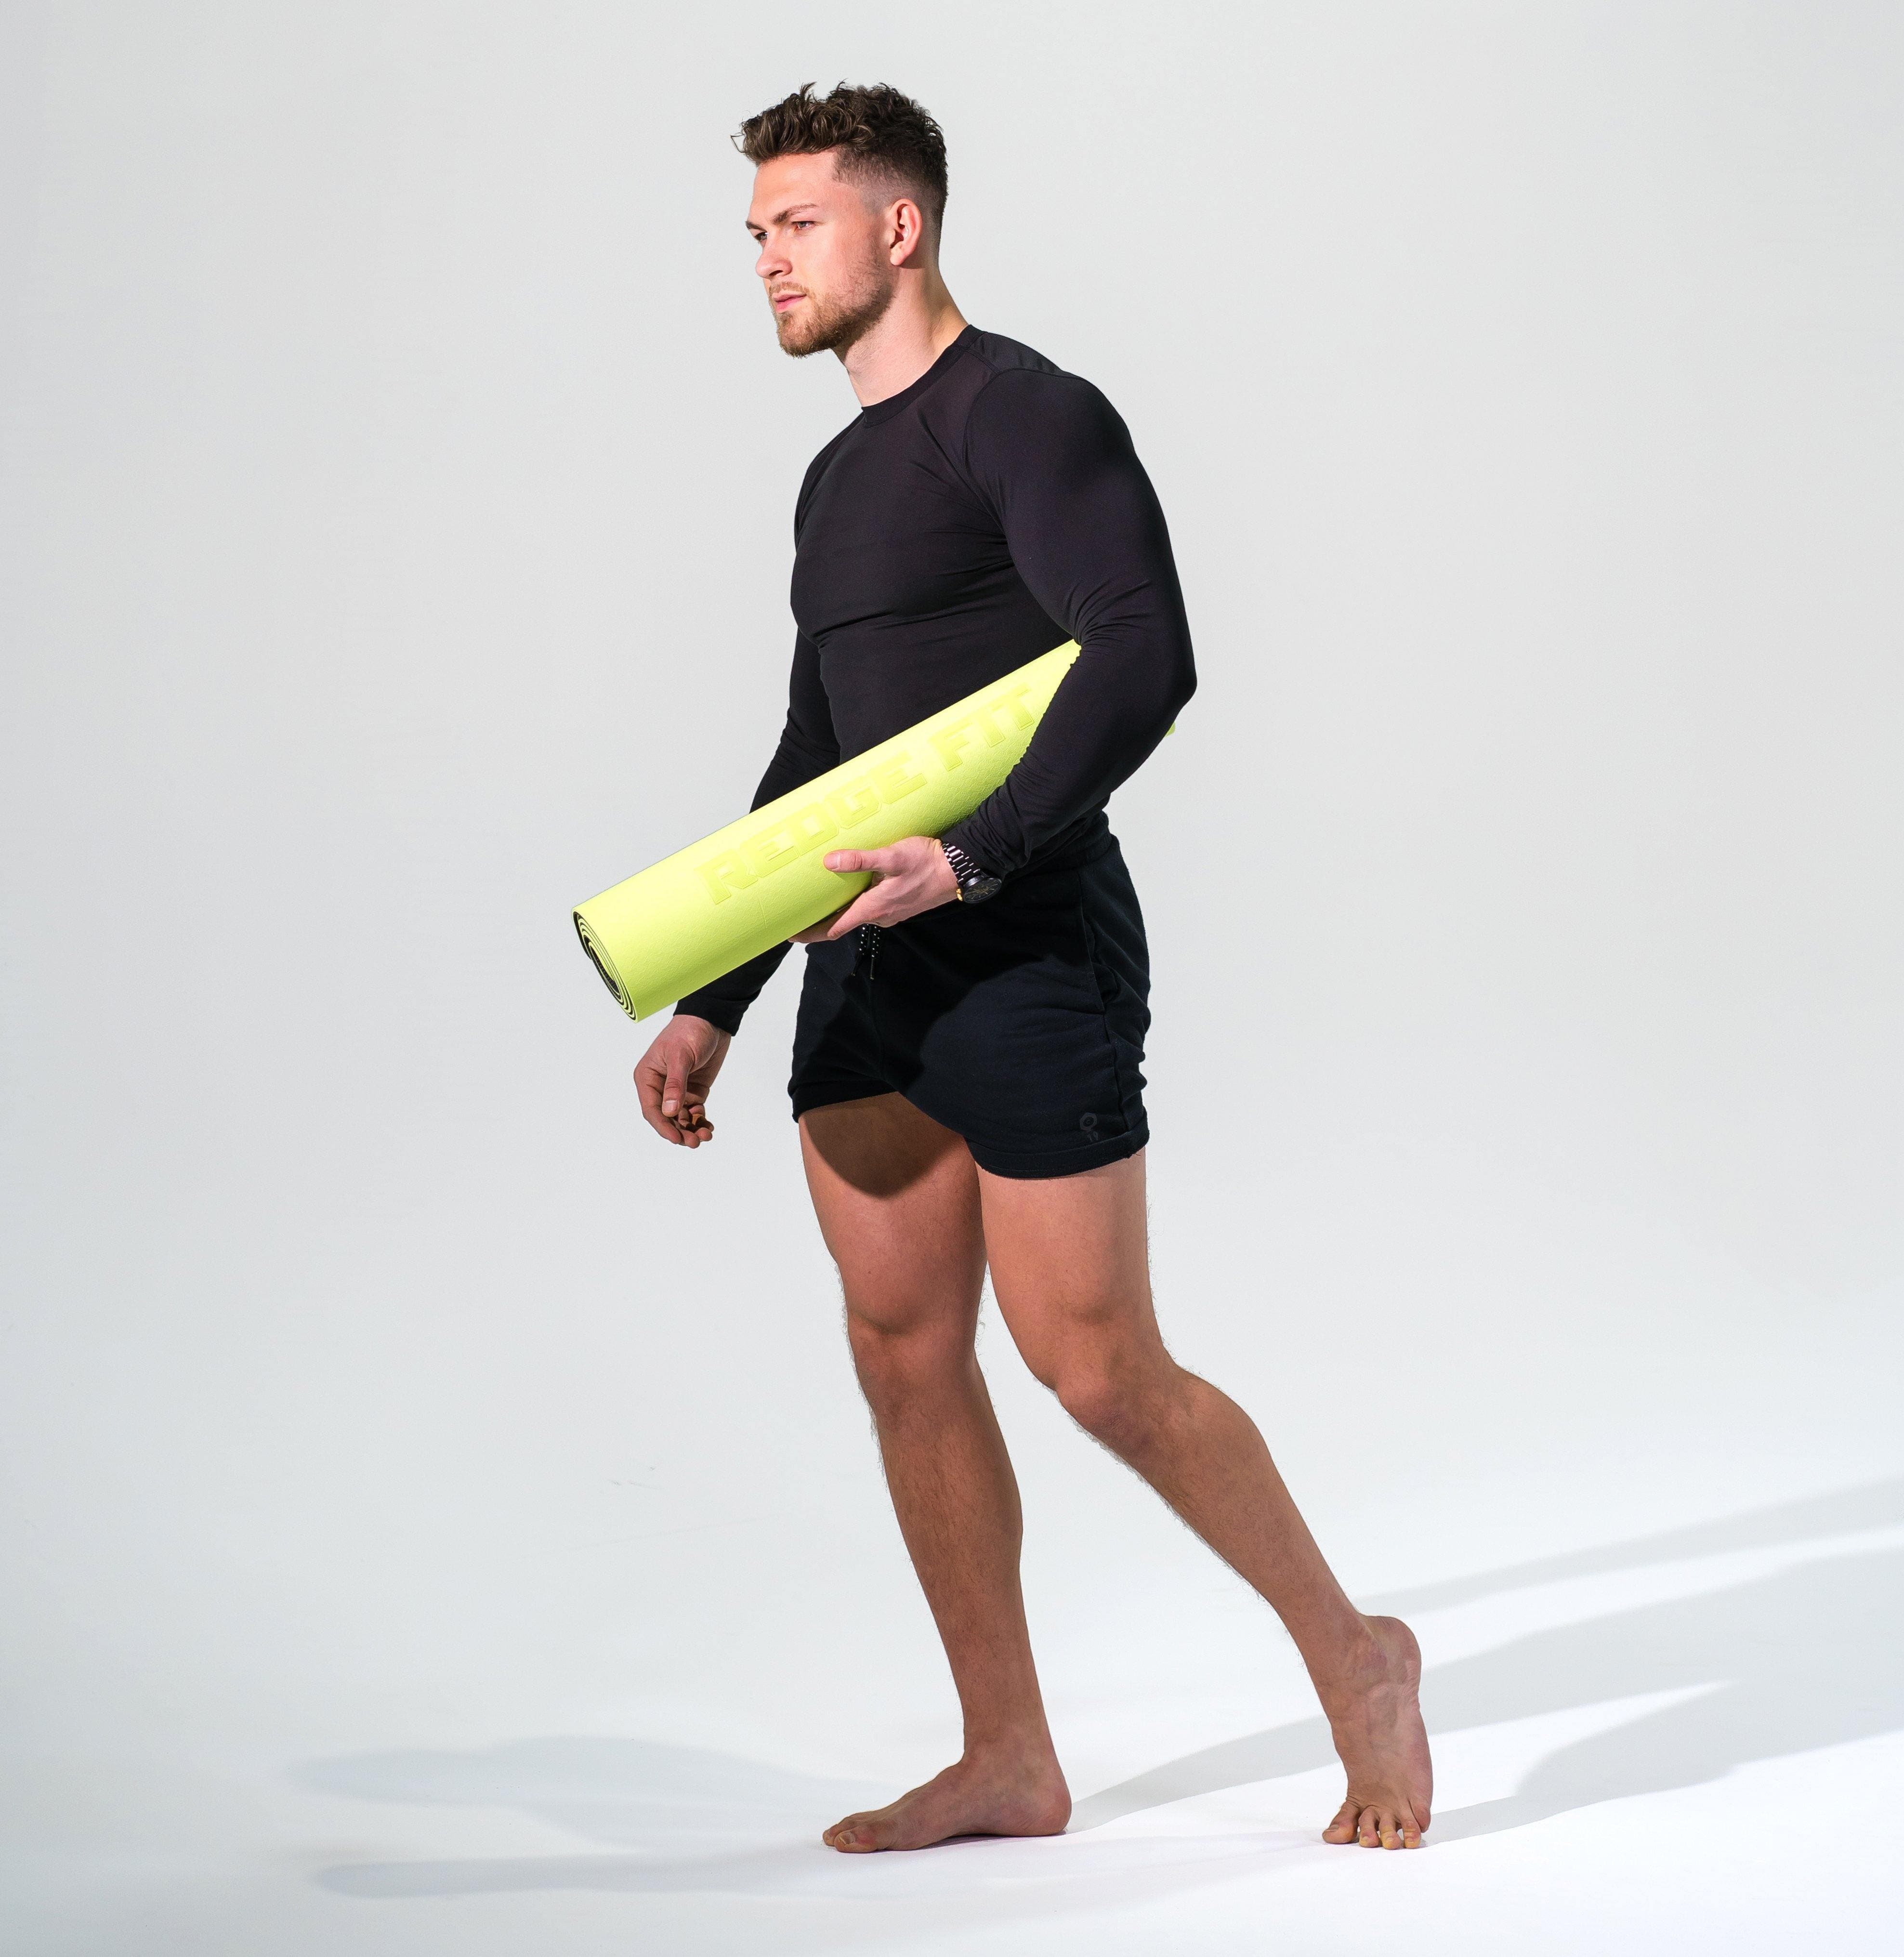 Man modeling the Redge Fit Double Sided Workout Mat Available at https://www.getredge.com/products/redge-double-sided-workout-mat